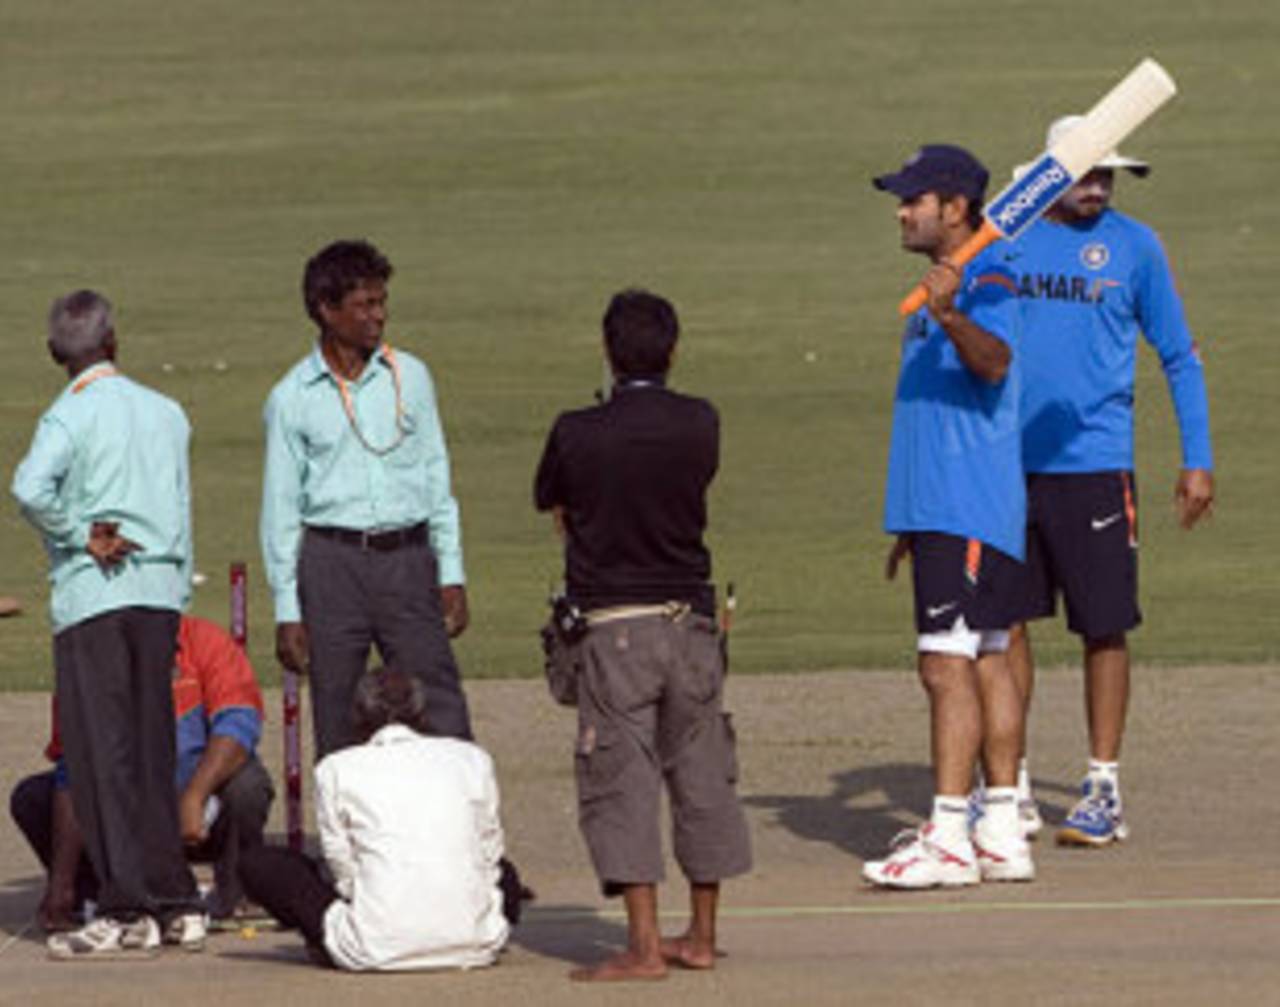 MS Dhoni has a chat with the groundsmen while Harbhajan Singh inspects the pitch, Delhi, October 30, 2009